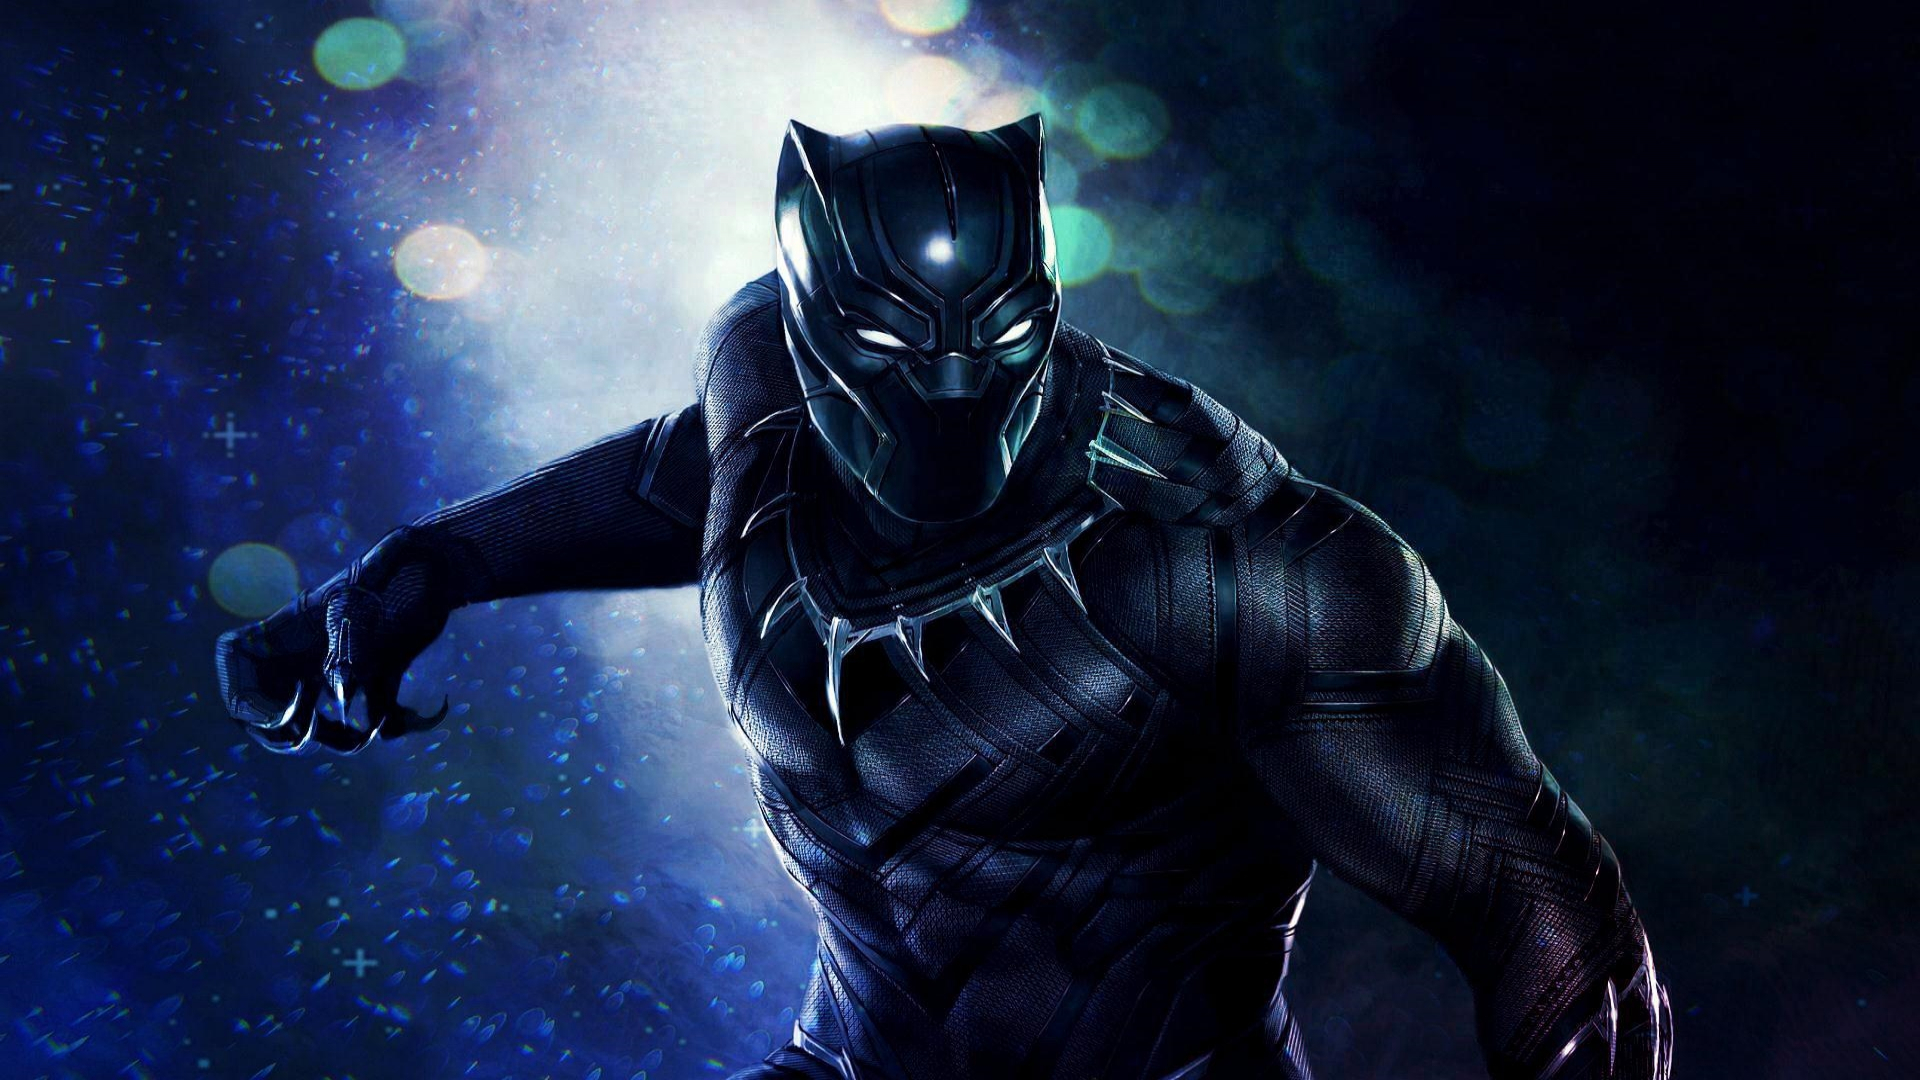 Marvel’s Black Panther pounces on to the big screen with Xsens